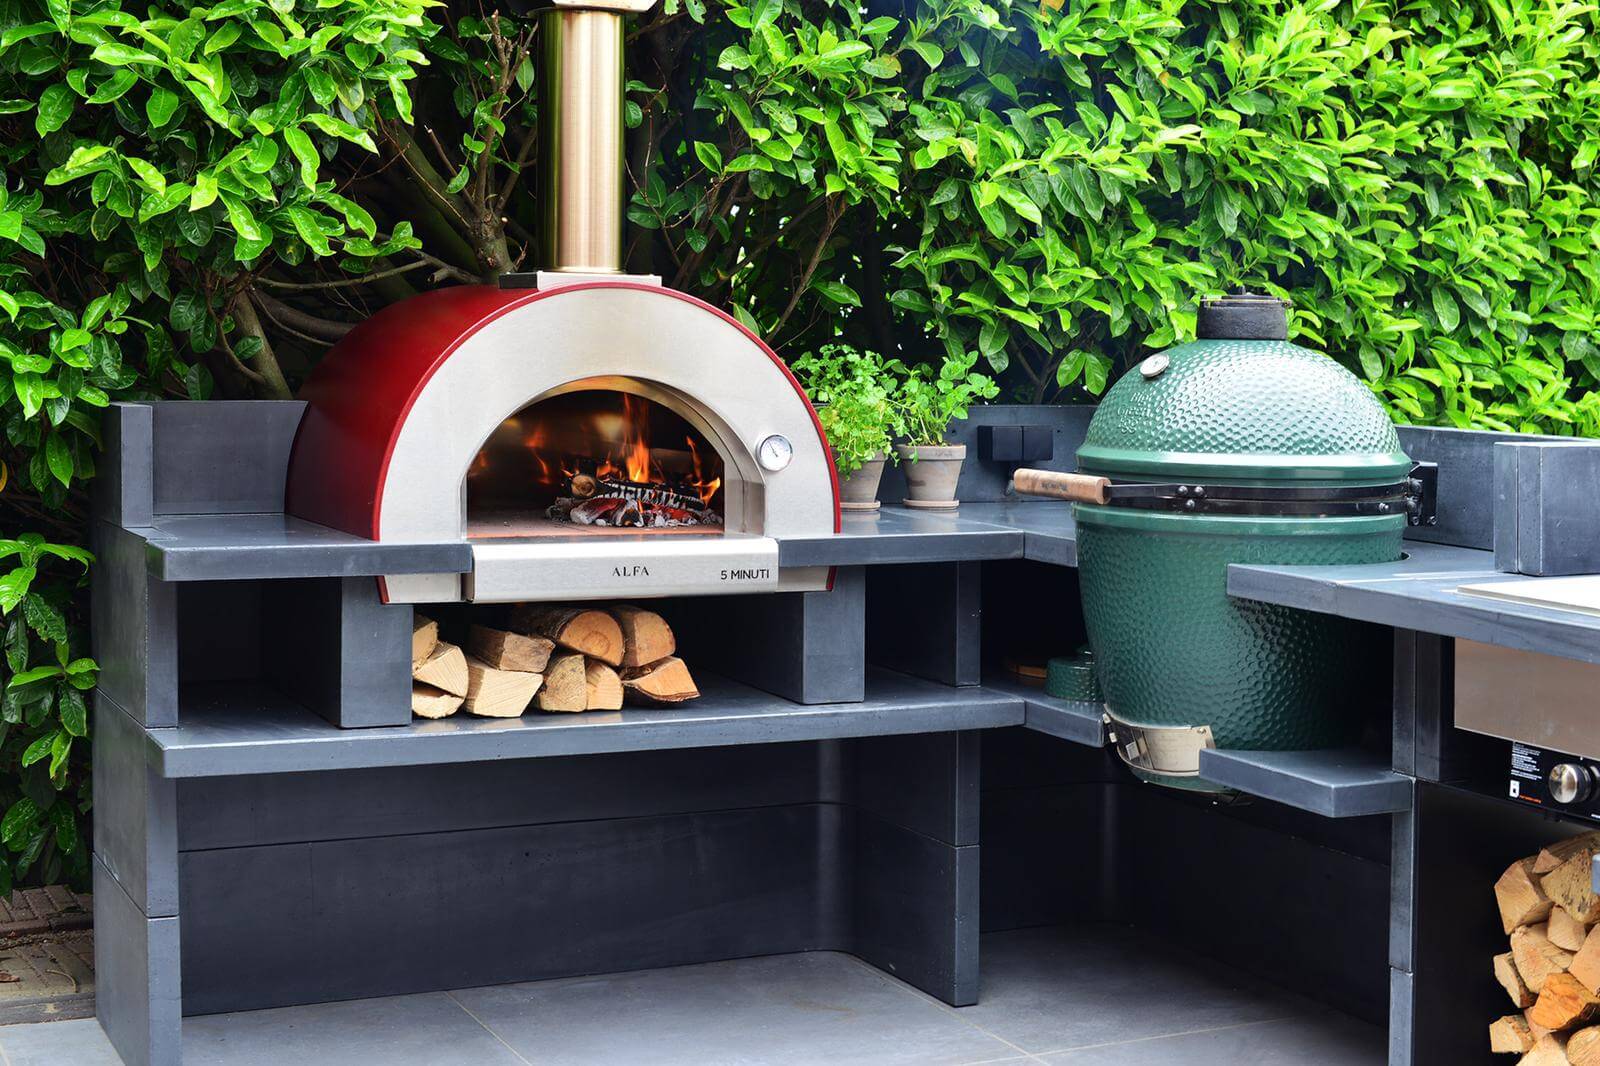 https://www.alfaforni.com/wp-content/uploads/2019/06/outdoor-cooking-pizza-and-grill.jpeg